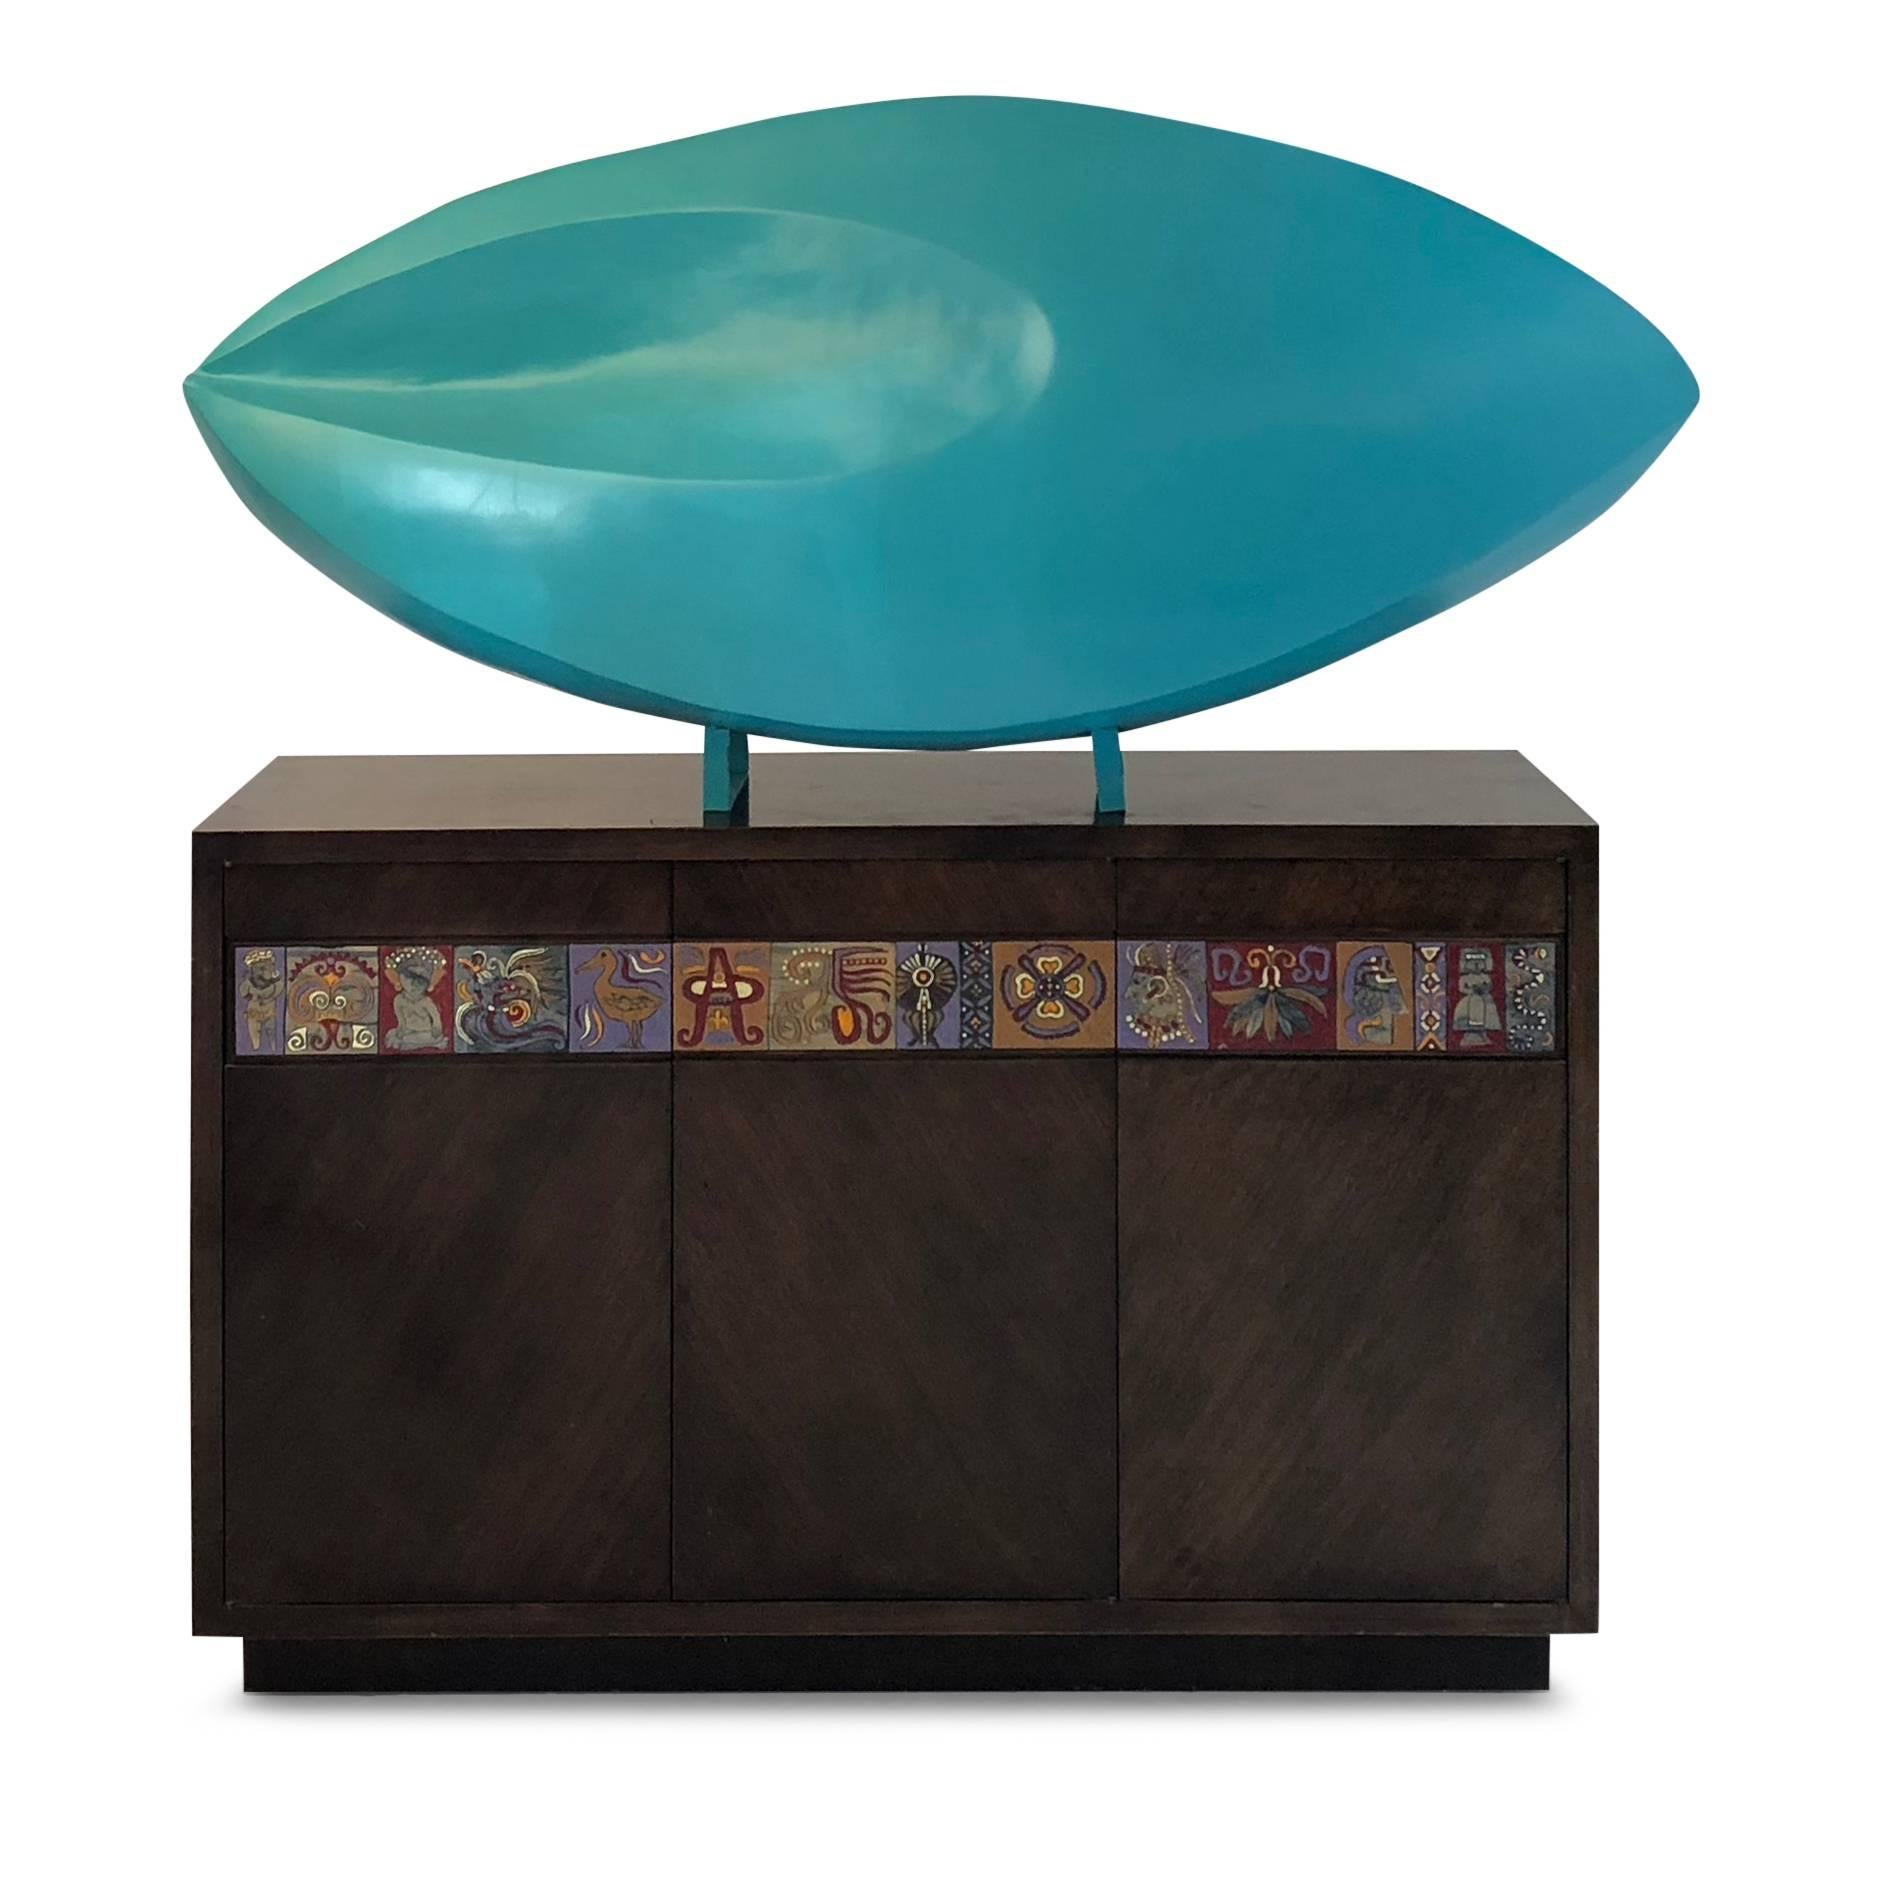 Sizable abstracted oval shaped sculpture, circa 1980. This art object is fabricated from fiberglass and has been painted in a vivid teal color. The loosely ellipse shaped piece curves to form pointed opposing ends and there is a scooped out shape